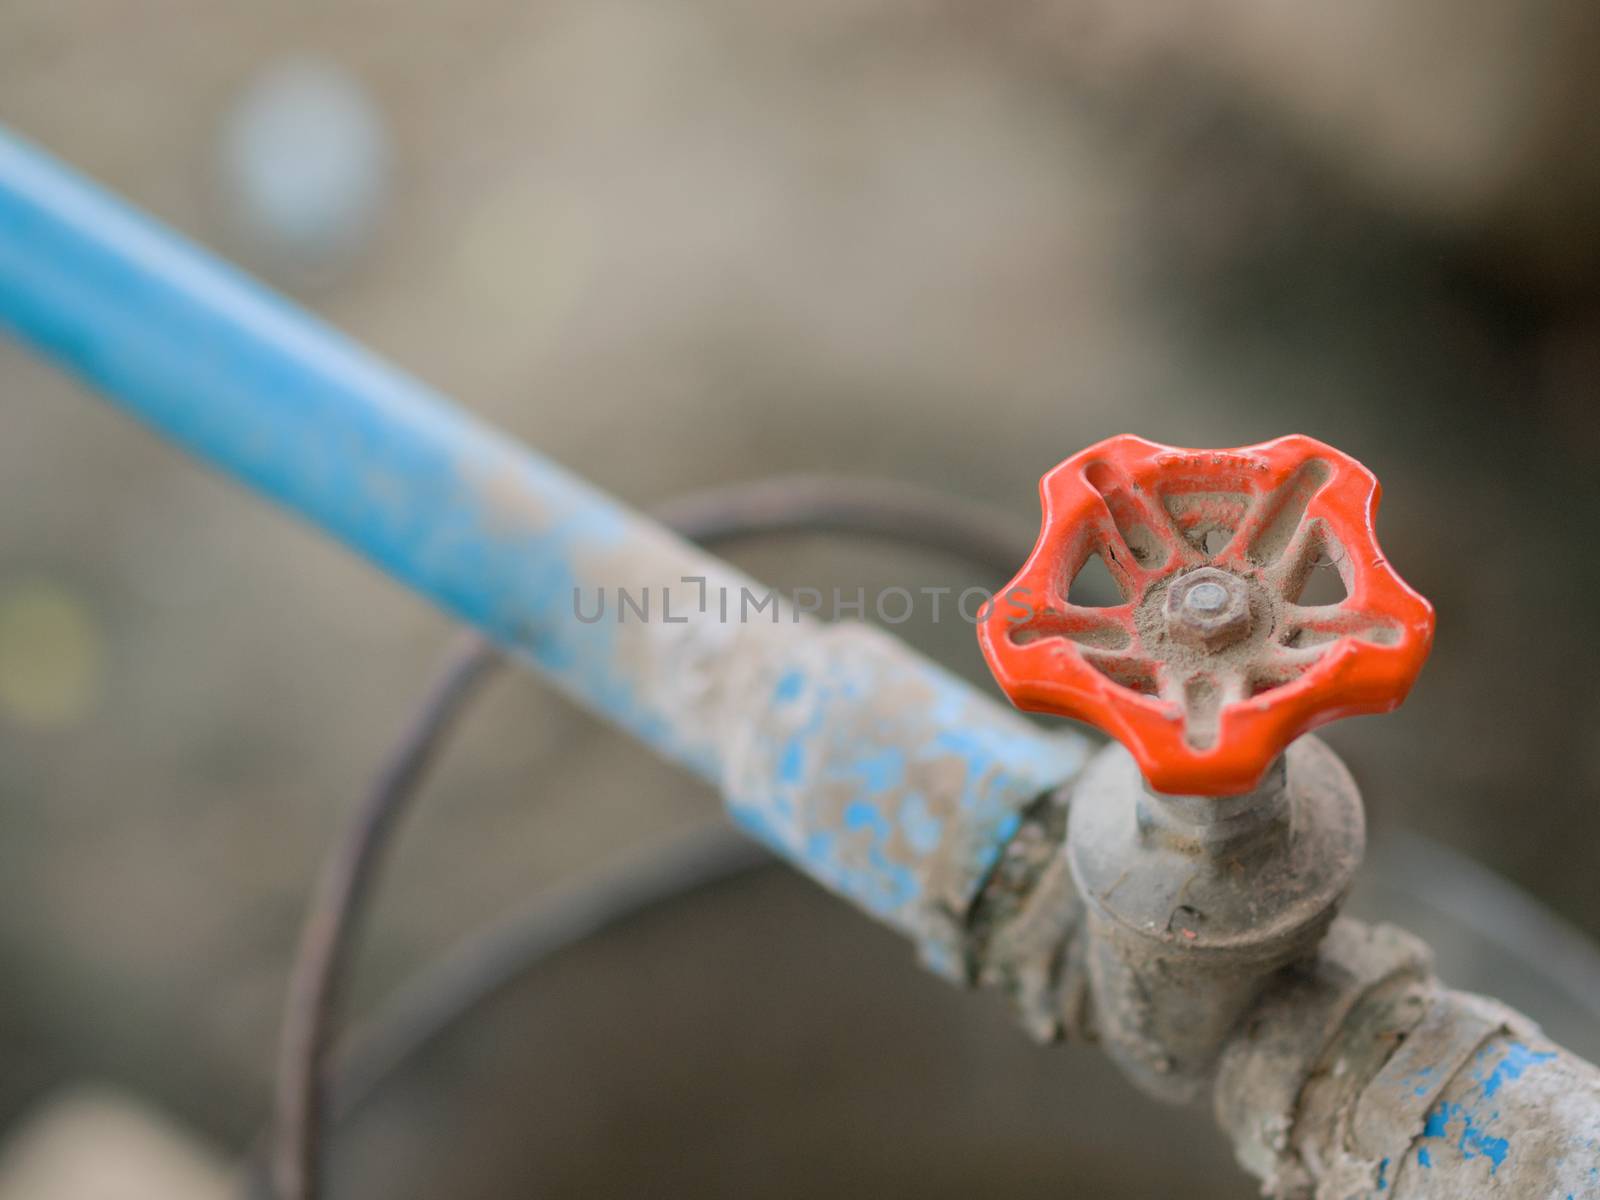 CLOSE-UP SHOT OF METAL TAP by PrettyTG